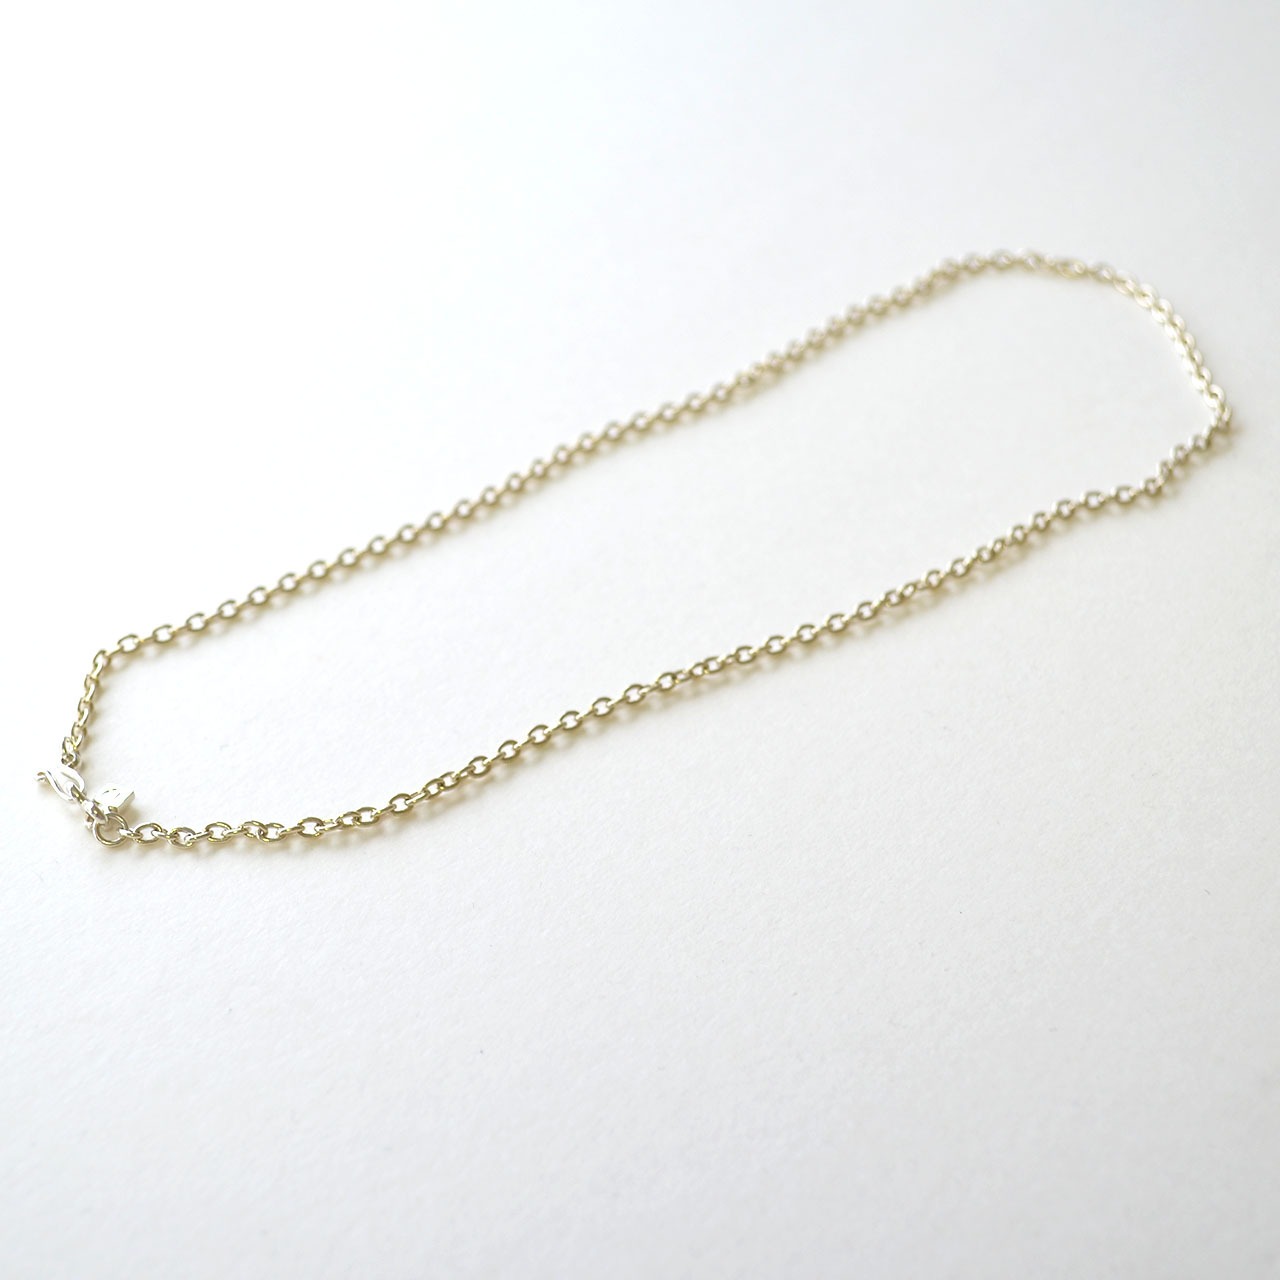 Oval Link  Chain Necklace (L) (50cm)